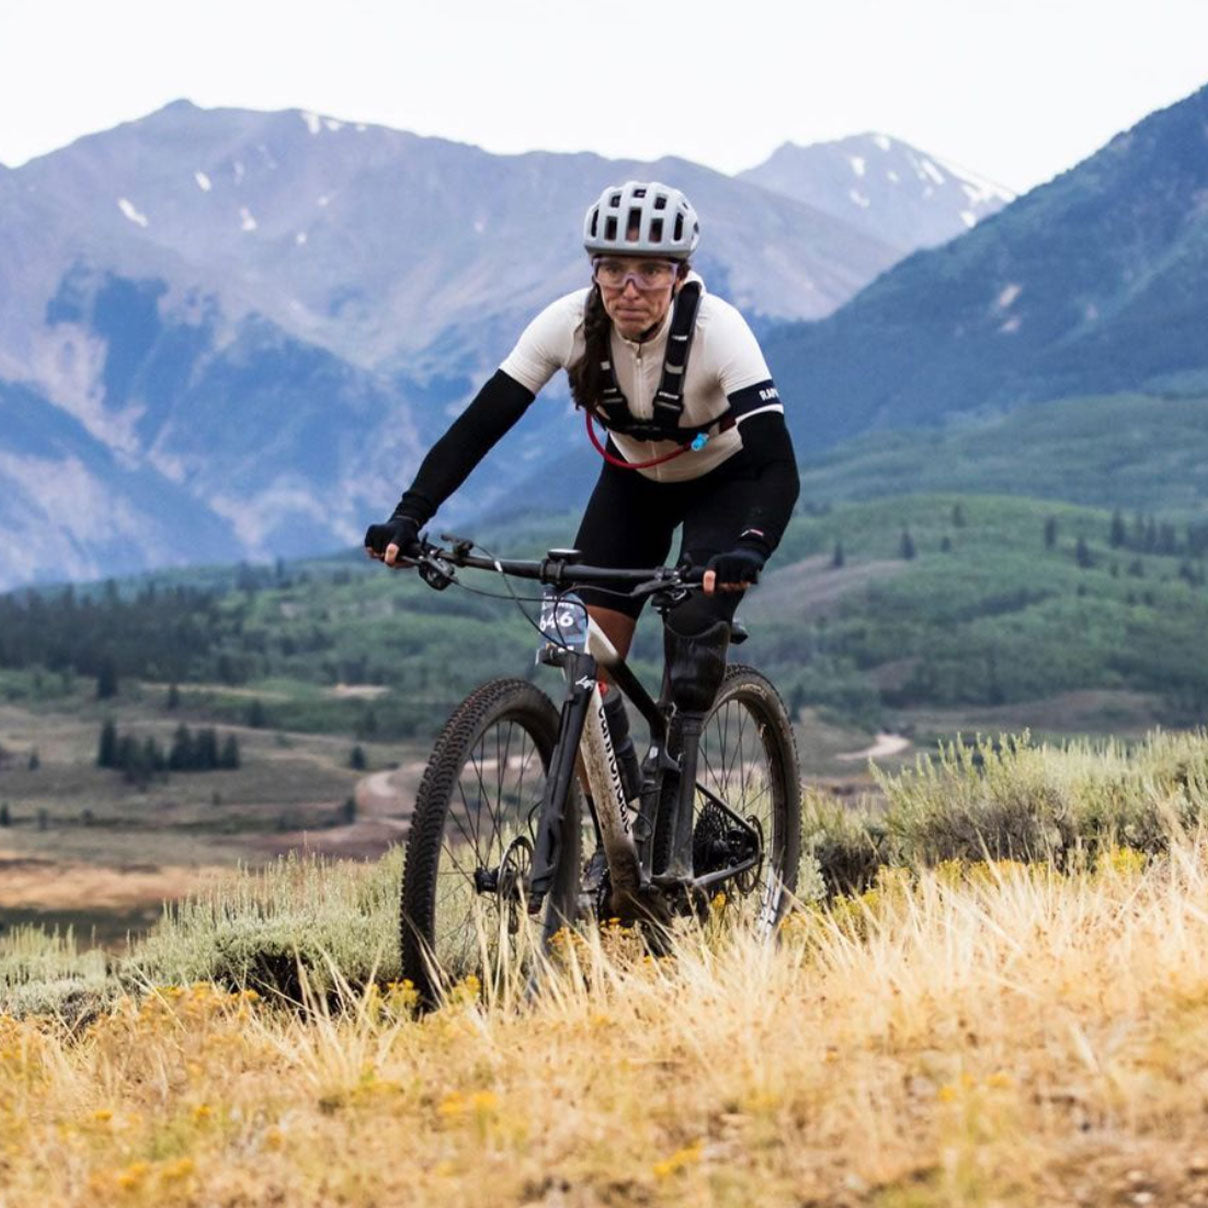 Meg Fisher bikes up a challenging hill on her mountain bike